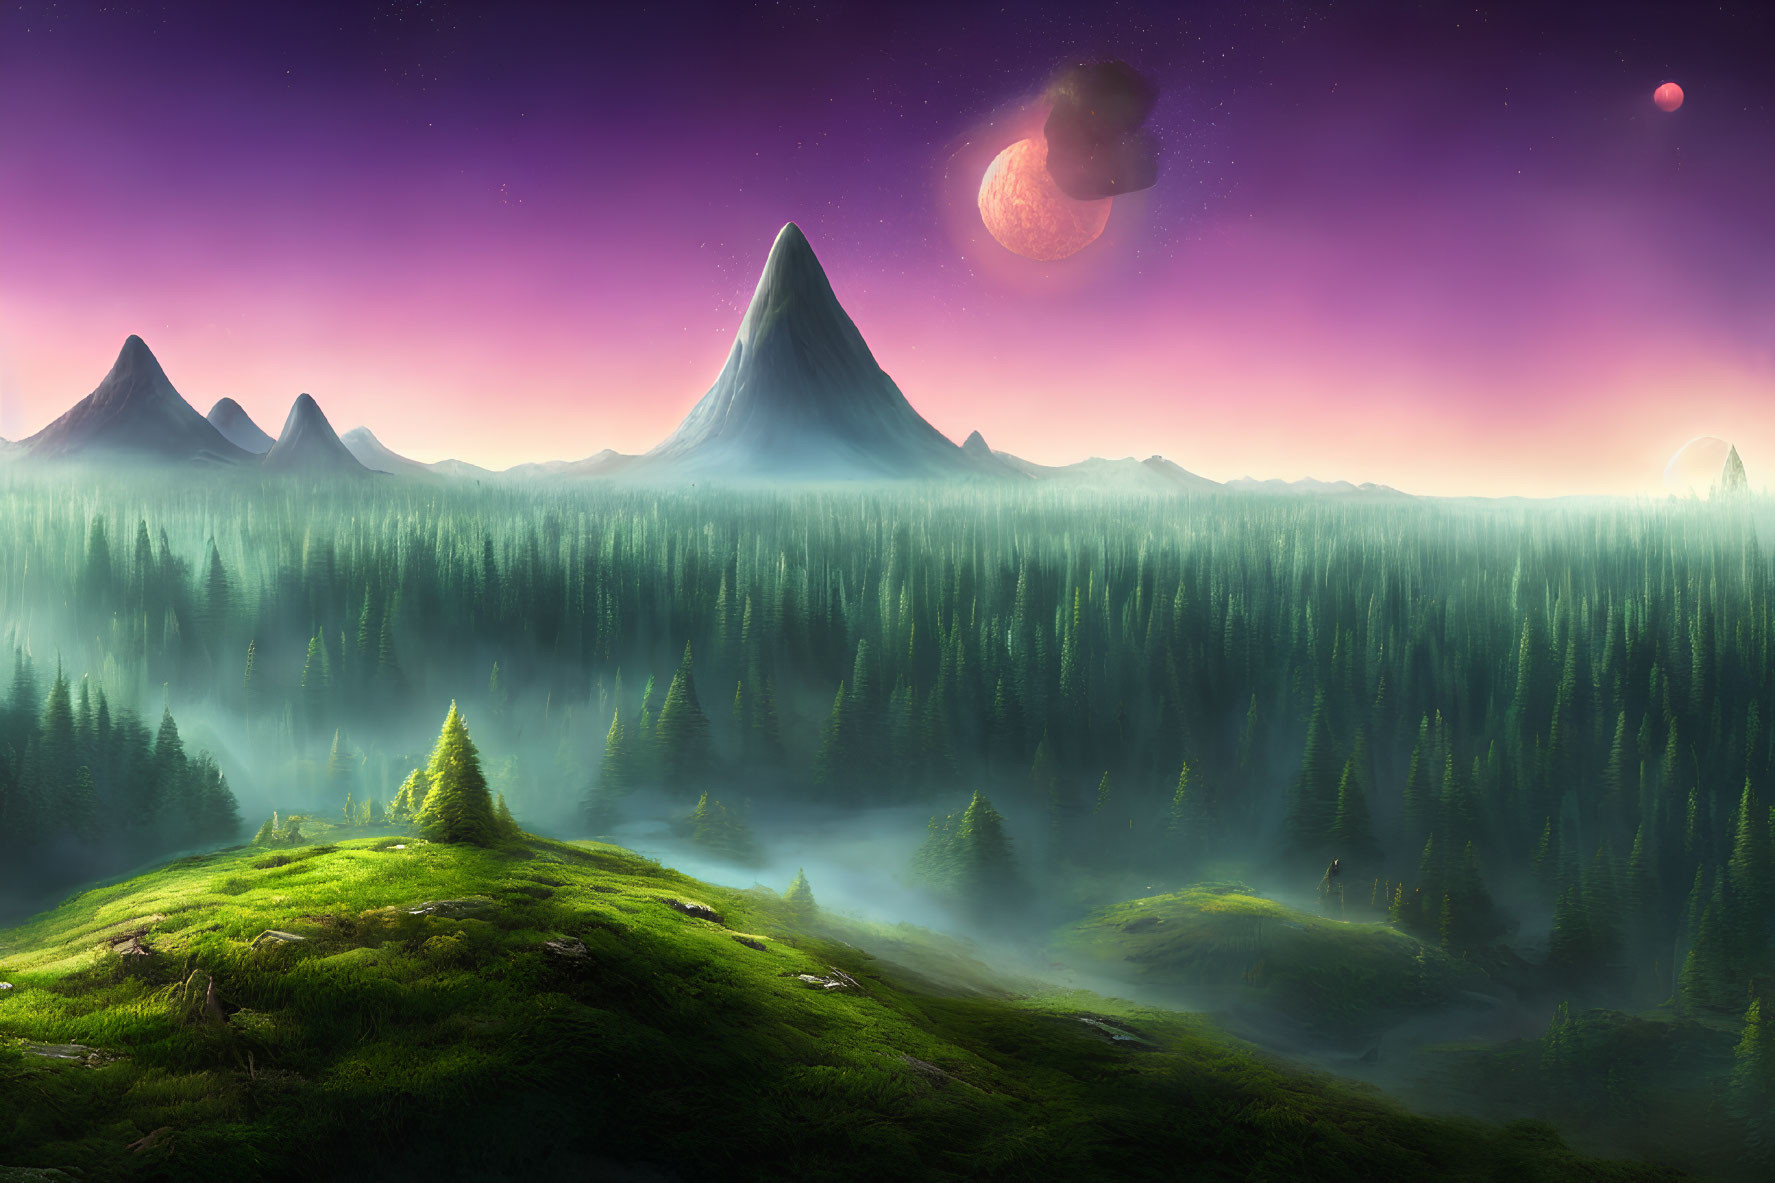 Fantasy landscape with lush forests, pointed mountains, and dual moons